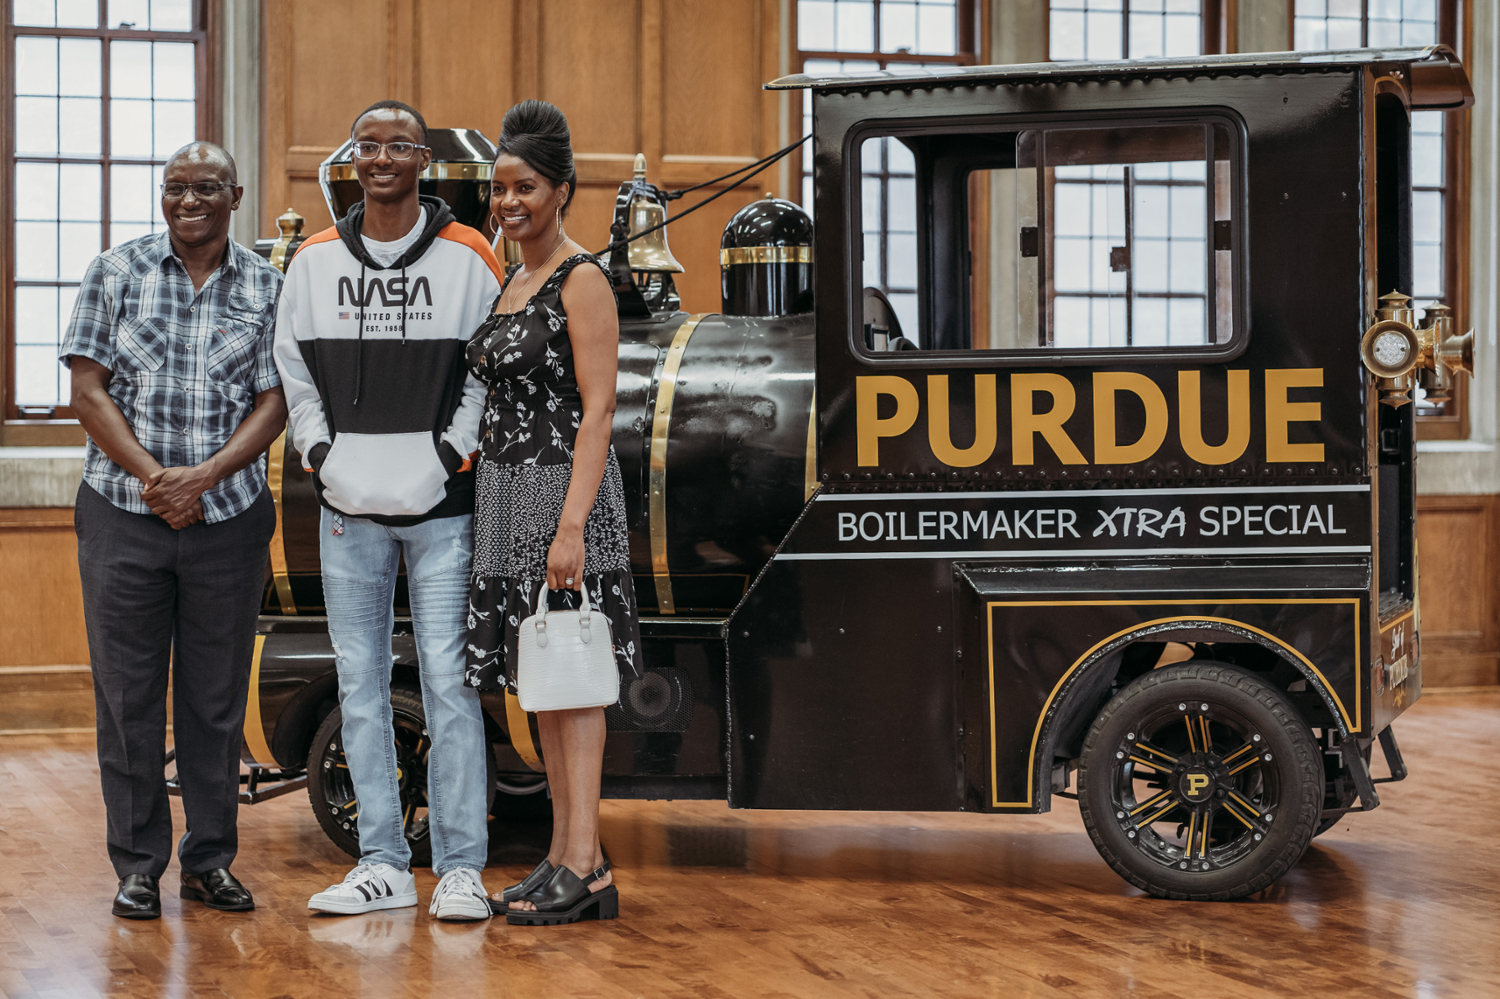 pictured: incoming student and his parents stand next to the boilermaker special train